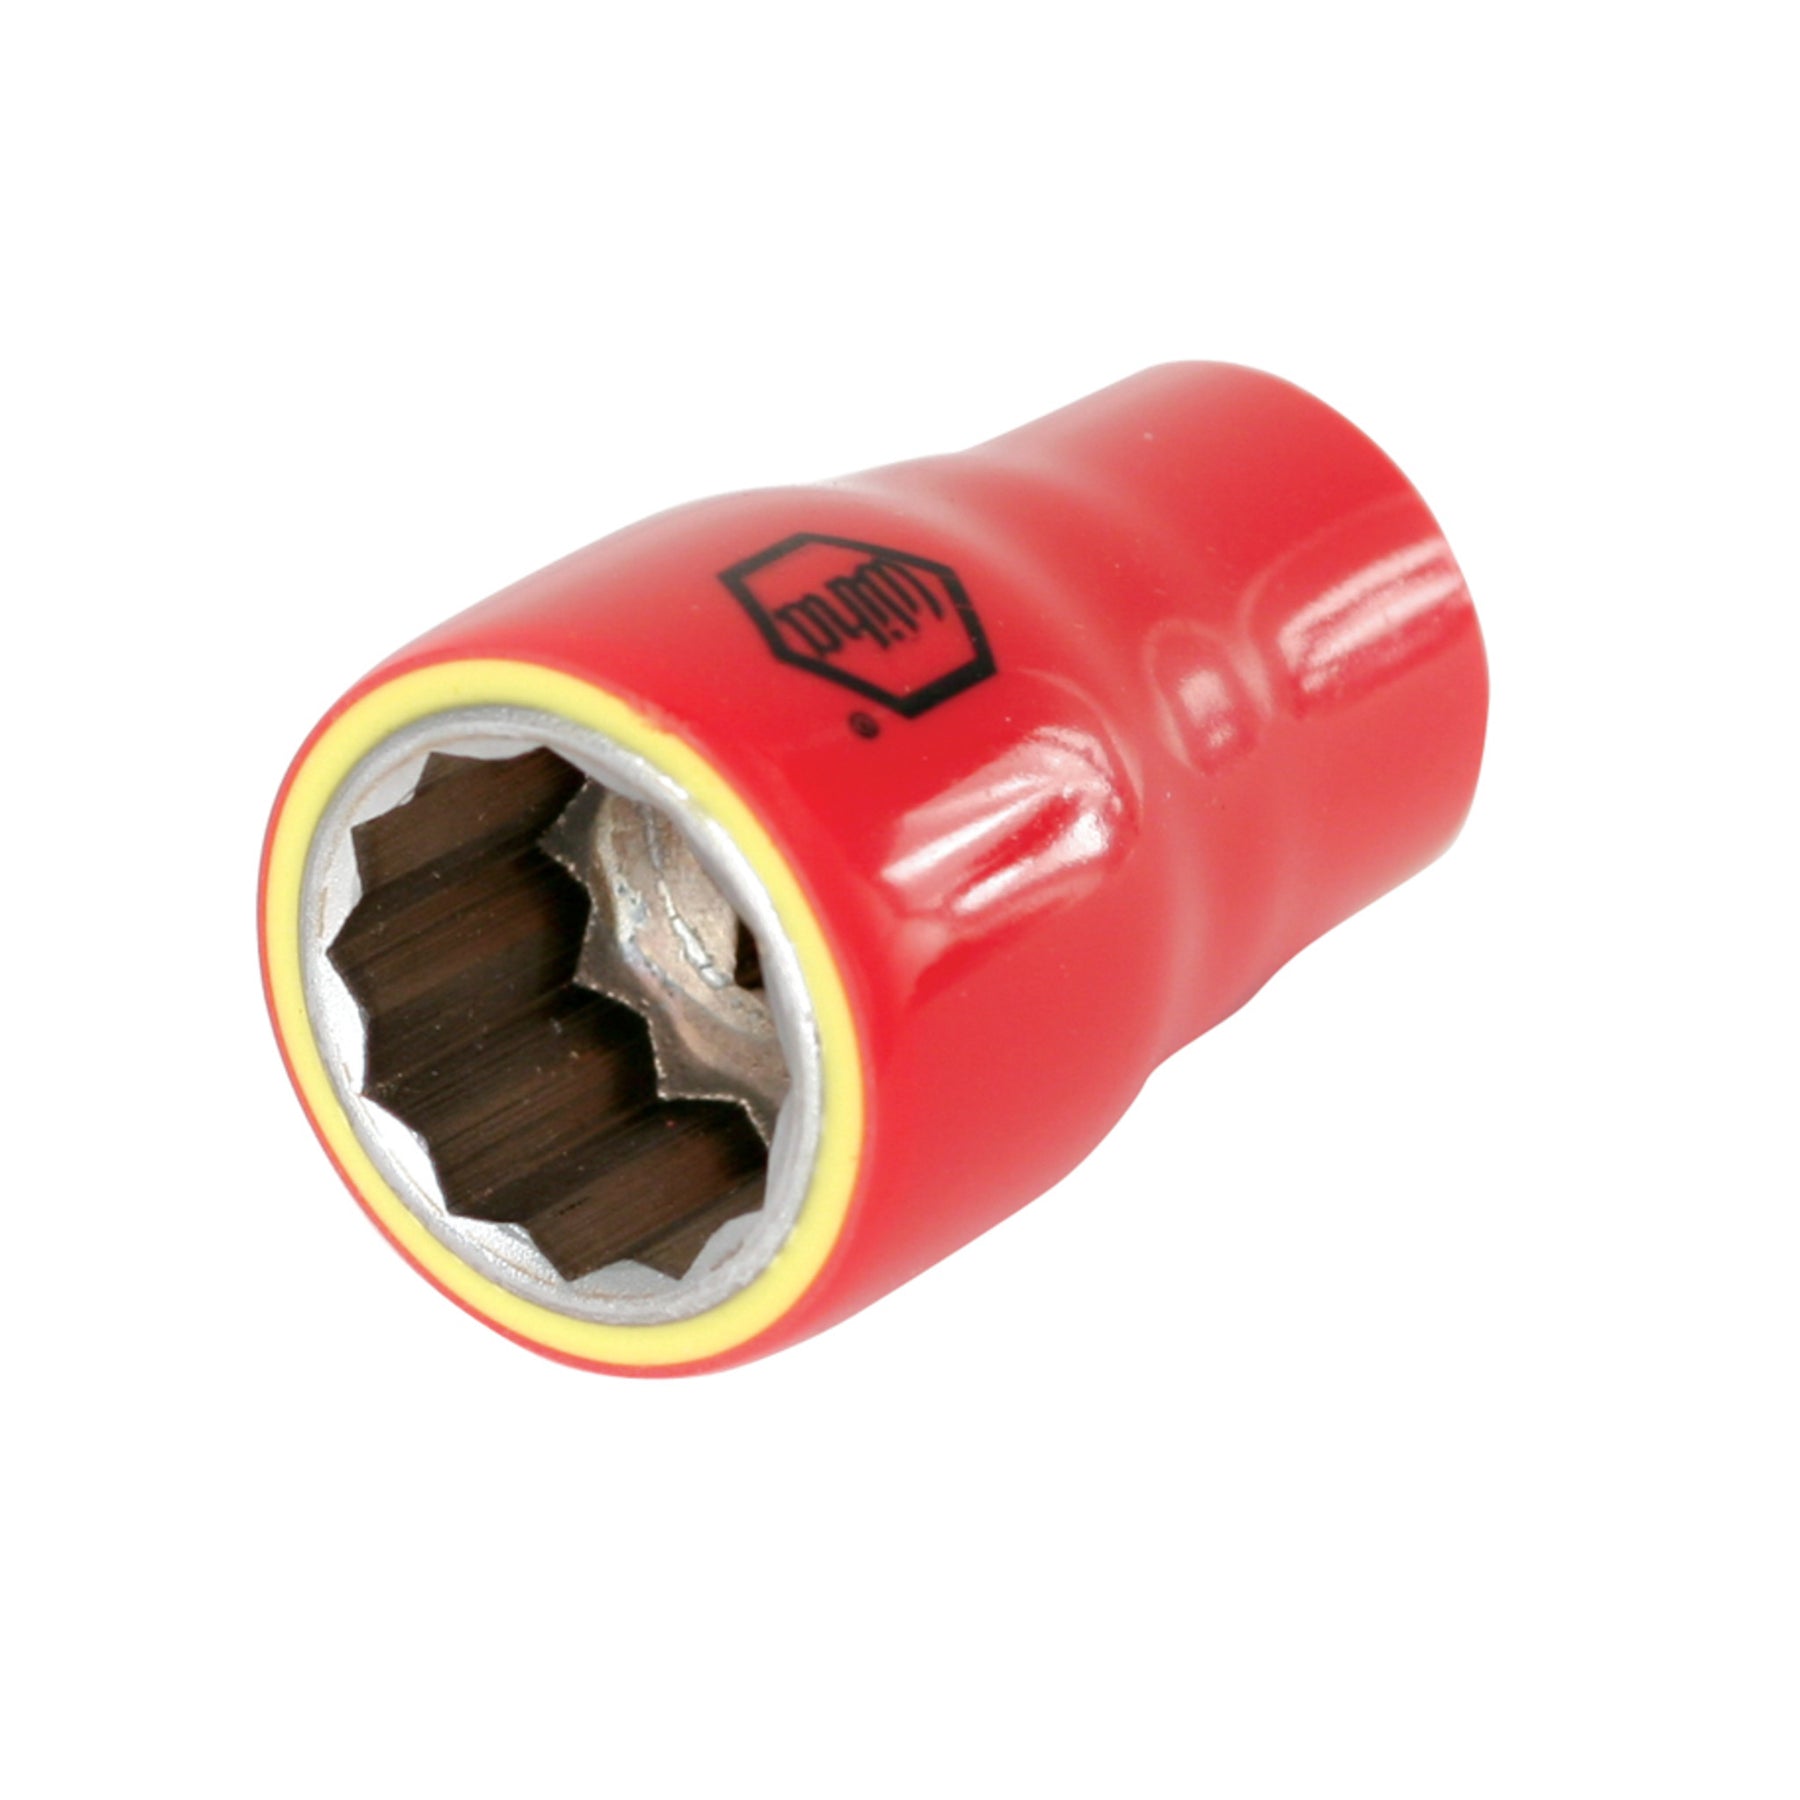 Insulated Socket 1/2" Drive 12mm